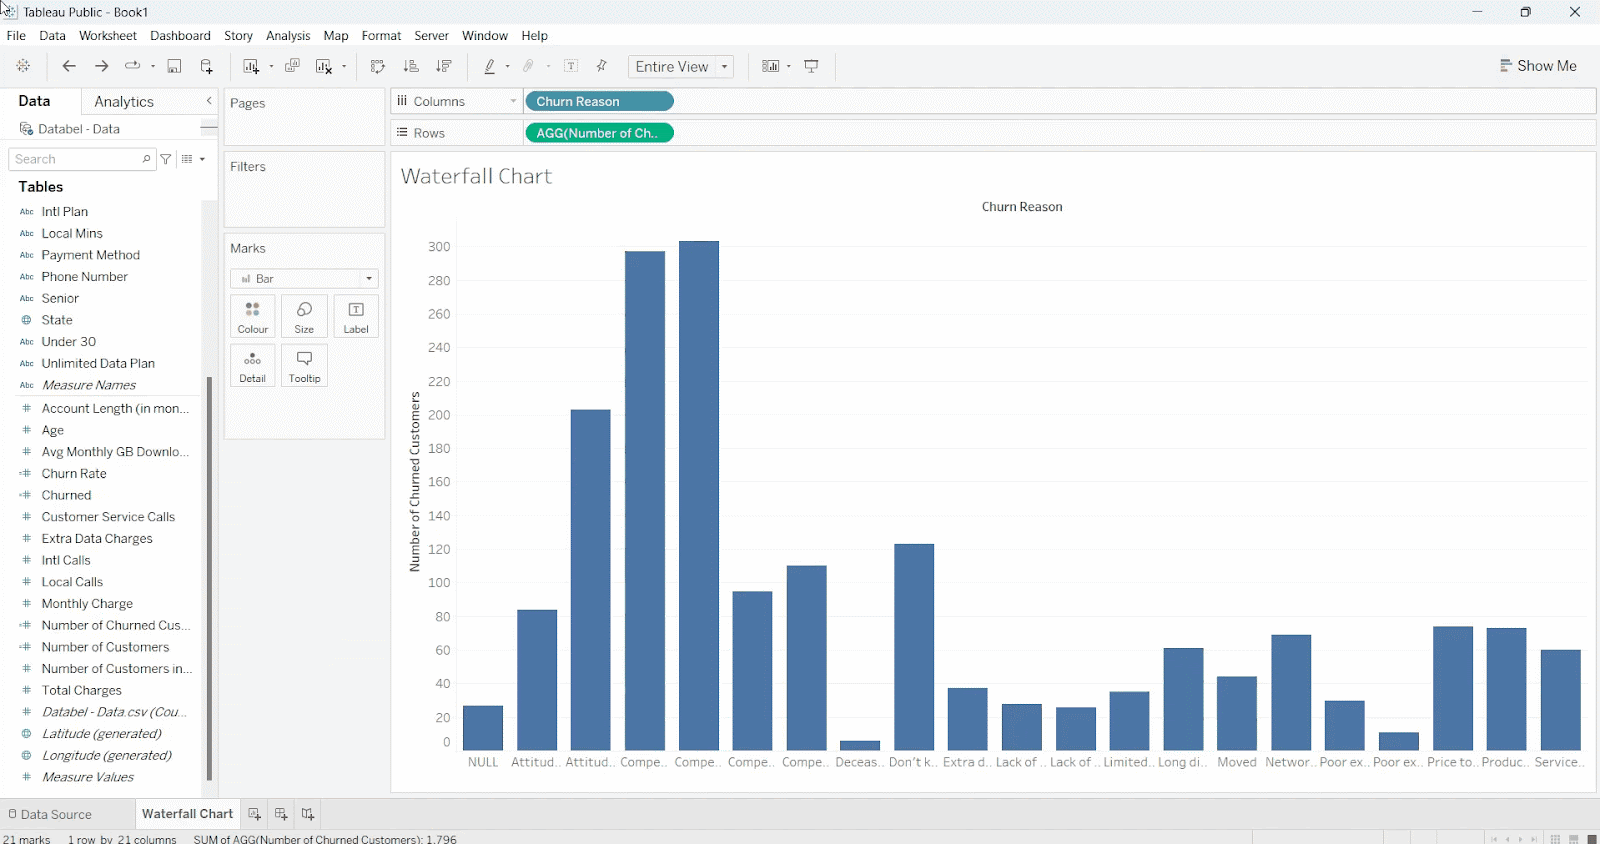 how to create a waterfall chart from a bar chart in Tableau